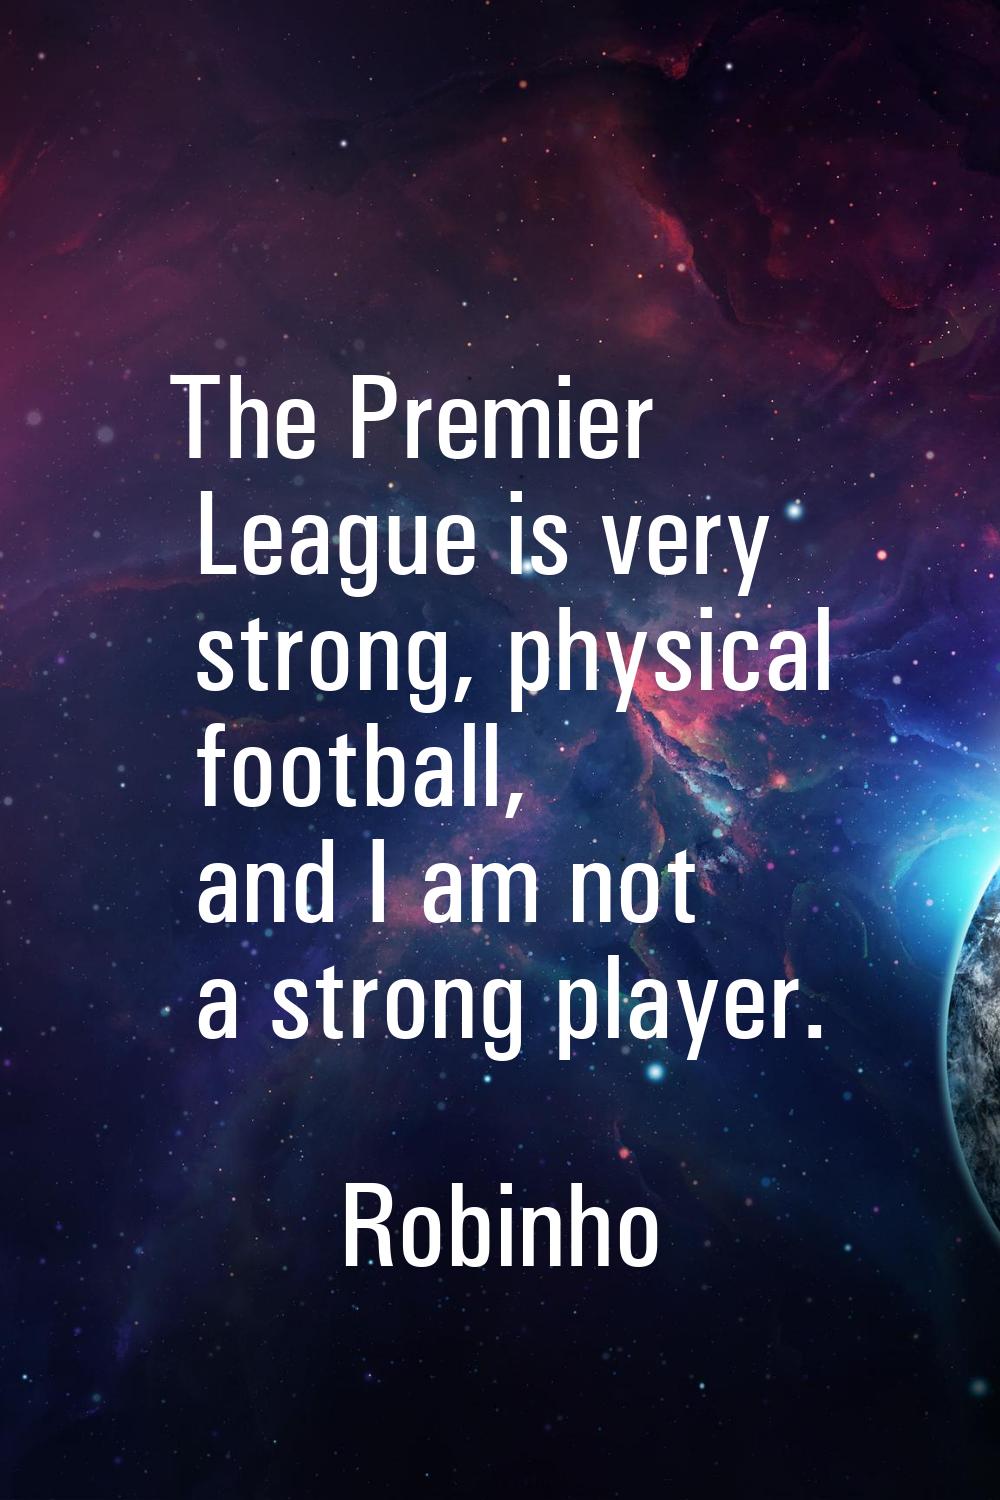 The Premier League is very strong, physical football, and I am not a strong player.